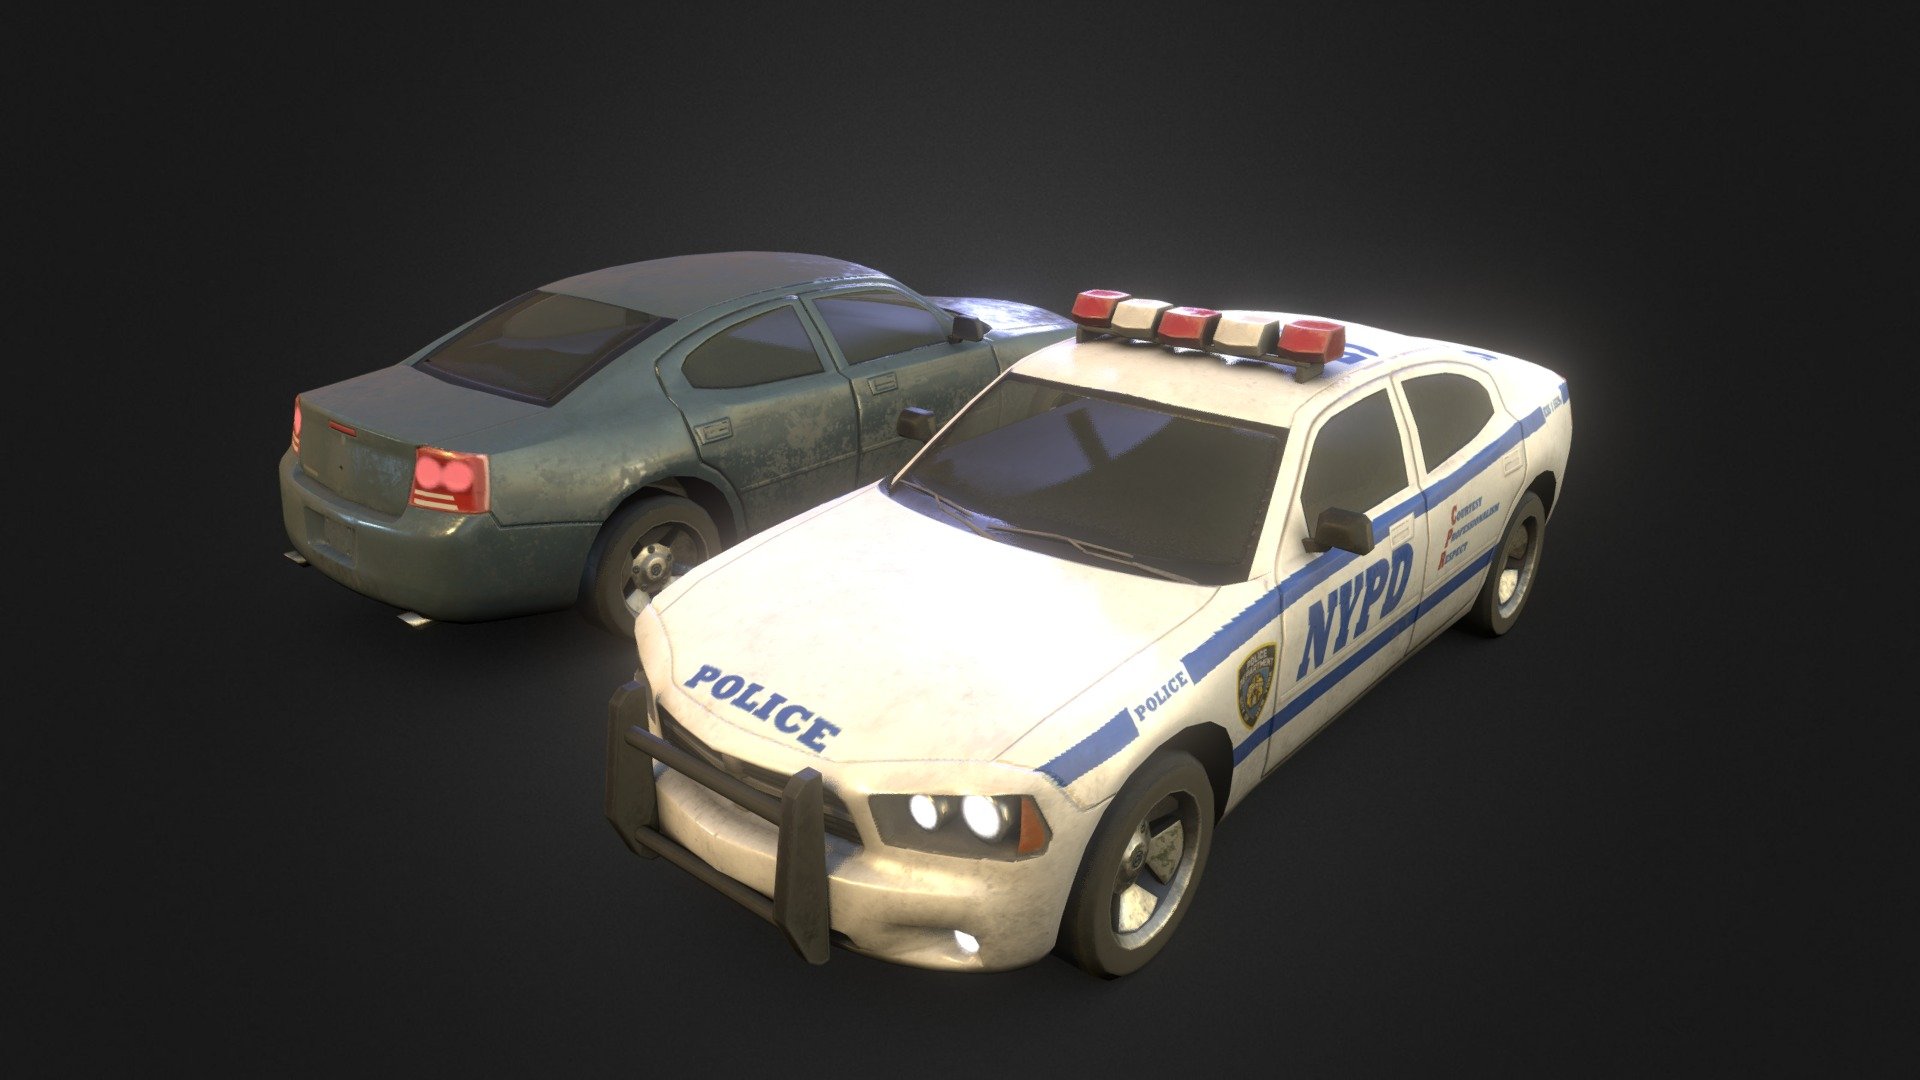 Lowpoly American sedan, in both a civilian and police version.

Modeled in 3DSMax, Textured in Substance Painter.

UPDATE FEB2017: Do not re-upload, re-sell, or use without giving credit, A DMCA will be filed if you do. That being said, enjoy my models. You are welcome to use them in Indie projects, mods, and artwork, as long as I'm credited properly 3d model